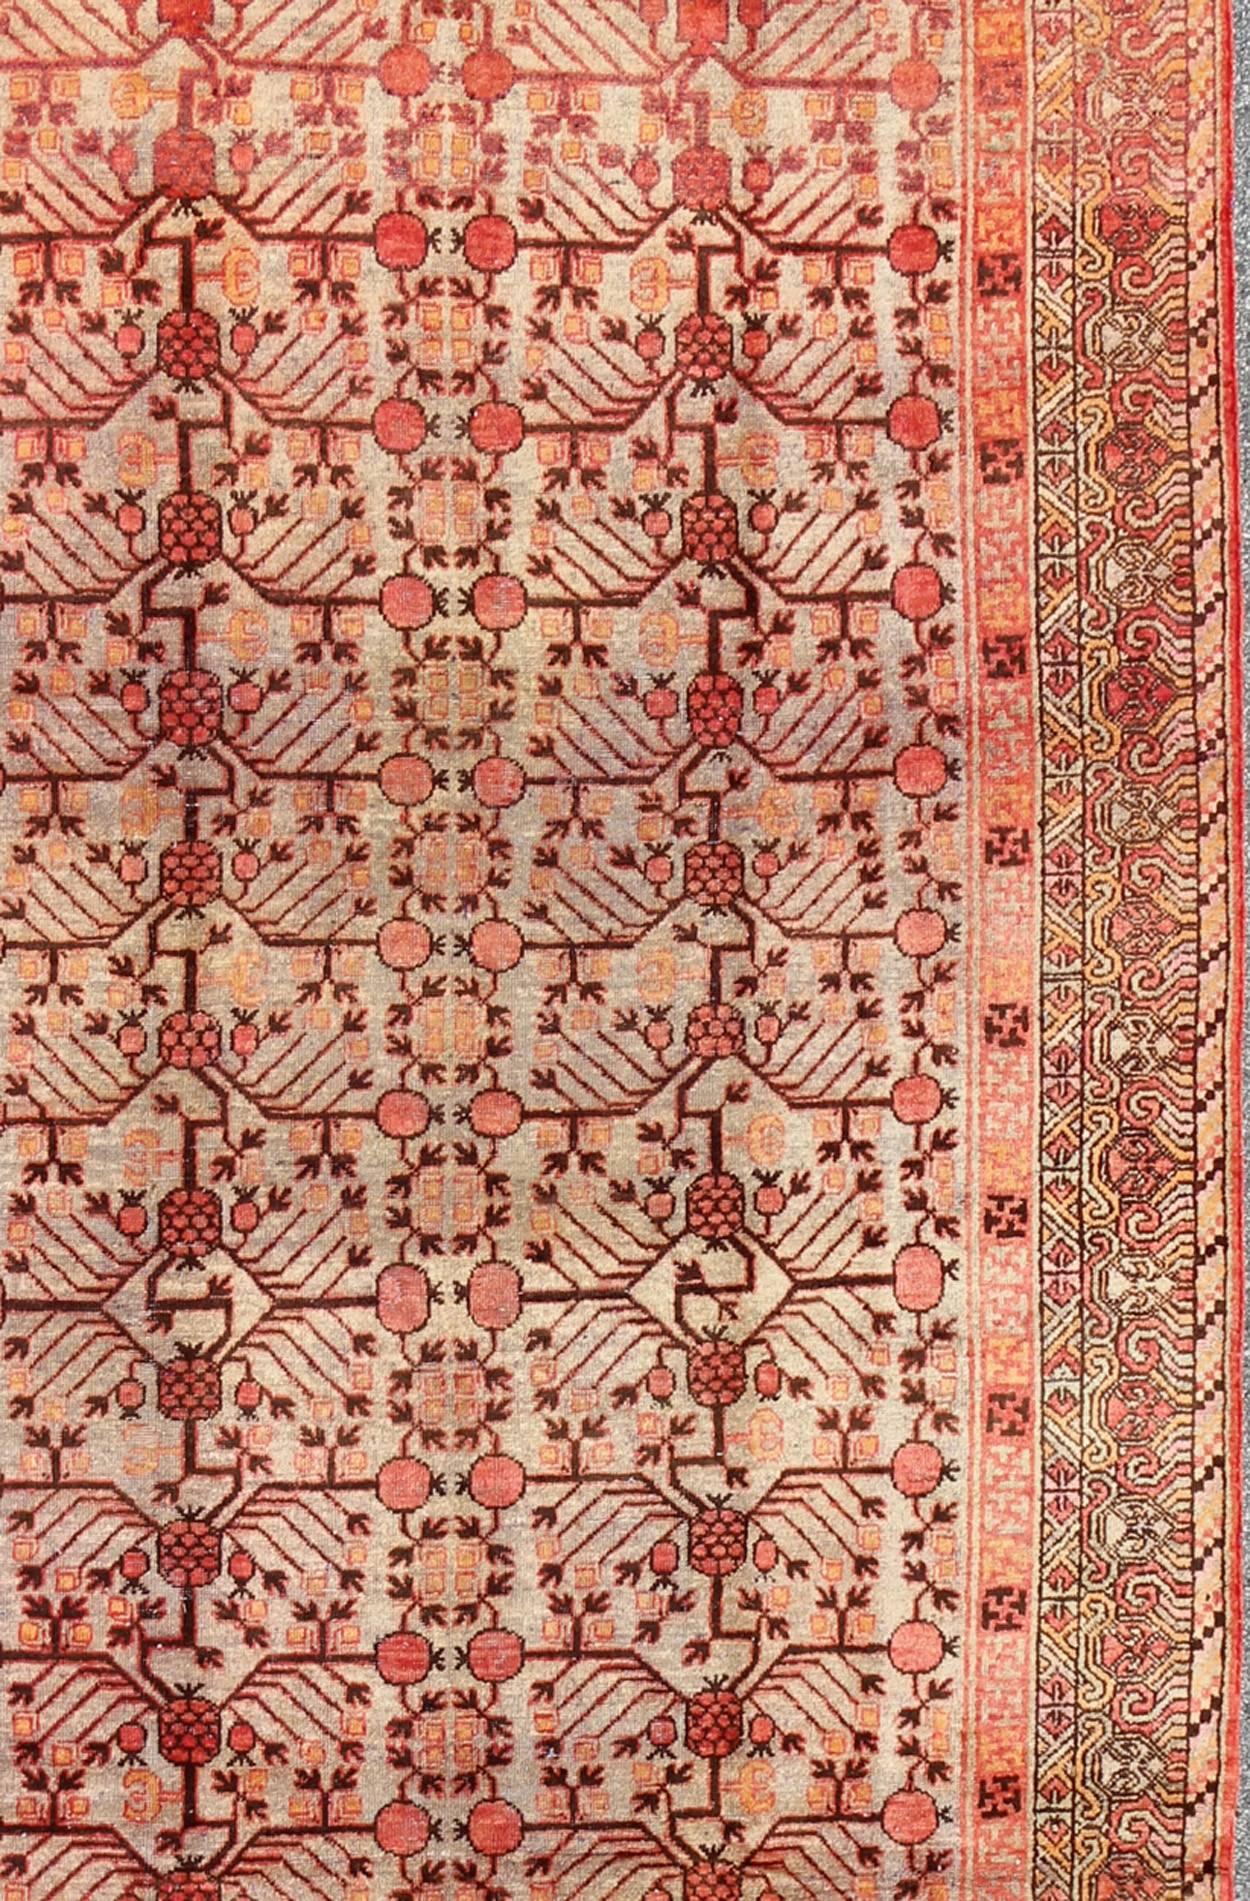 Large Khotan Antique Rug with Pomegranate Design in Taupe, Green, Red and Brown In Good Condition For Sale In Atlanta, GA